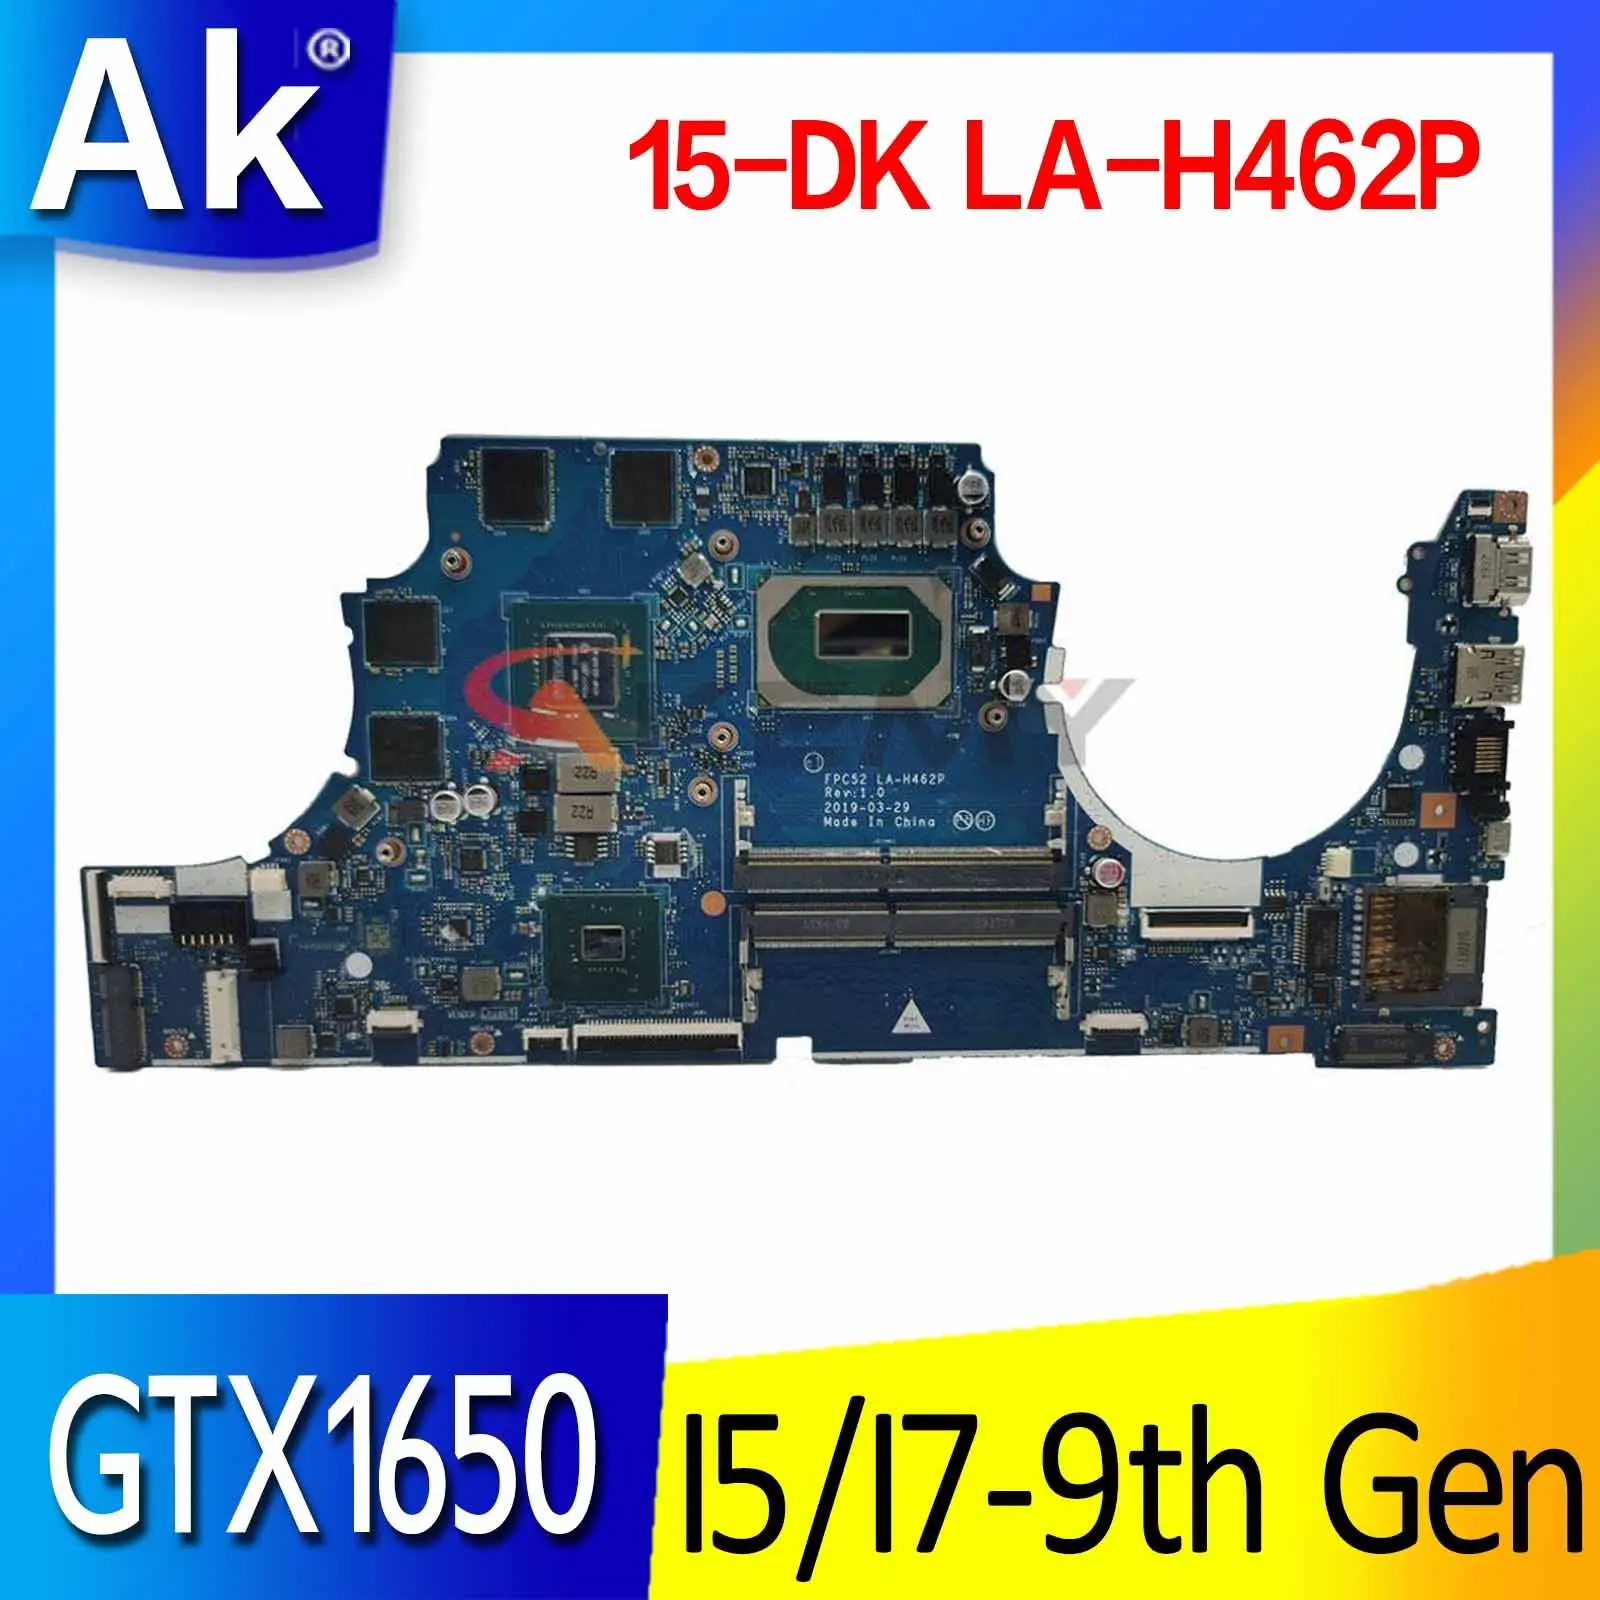 

LA-H462P Motherboard For HP Pavilion 15-DK 15T-DK Laptop Motherboard Mainboard With I5-9300H i7-9750H CPU GTX1650 4GB GPU